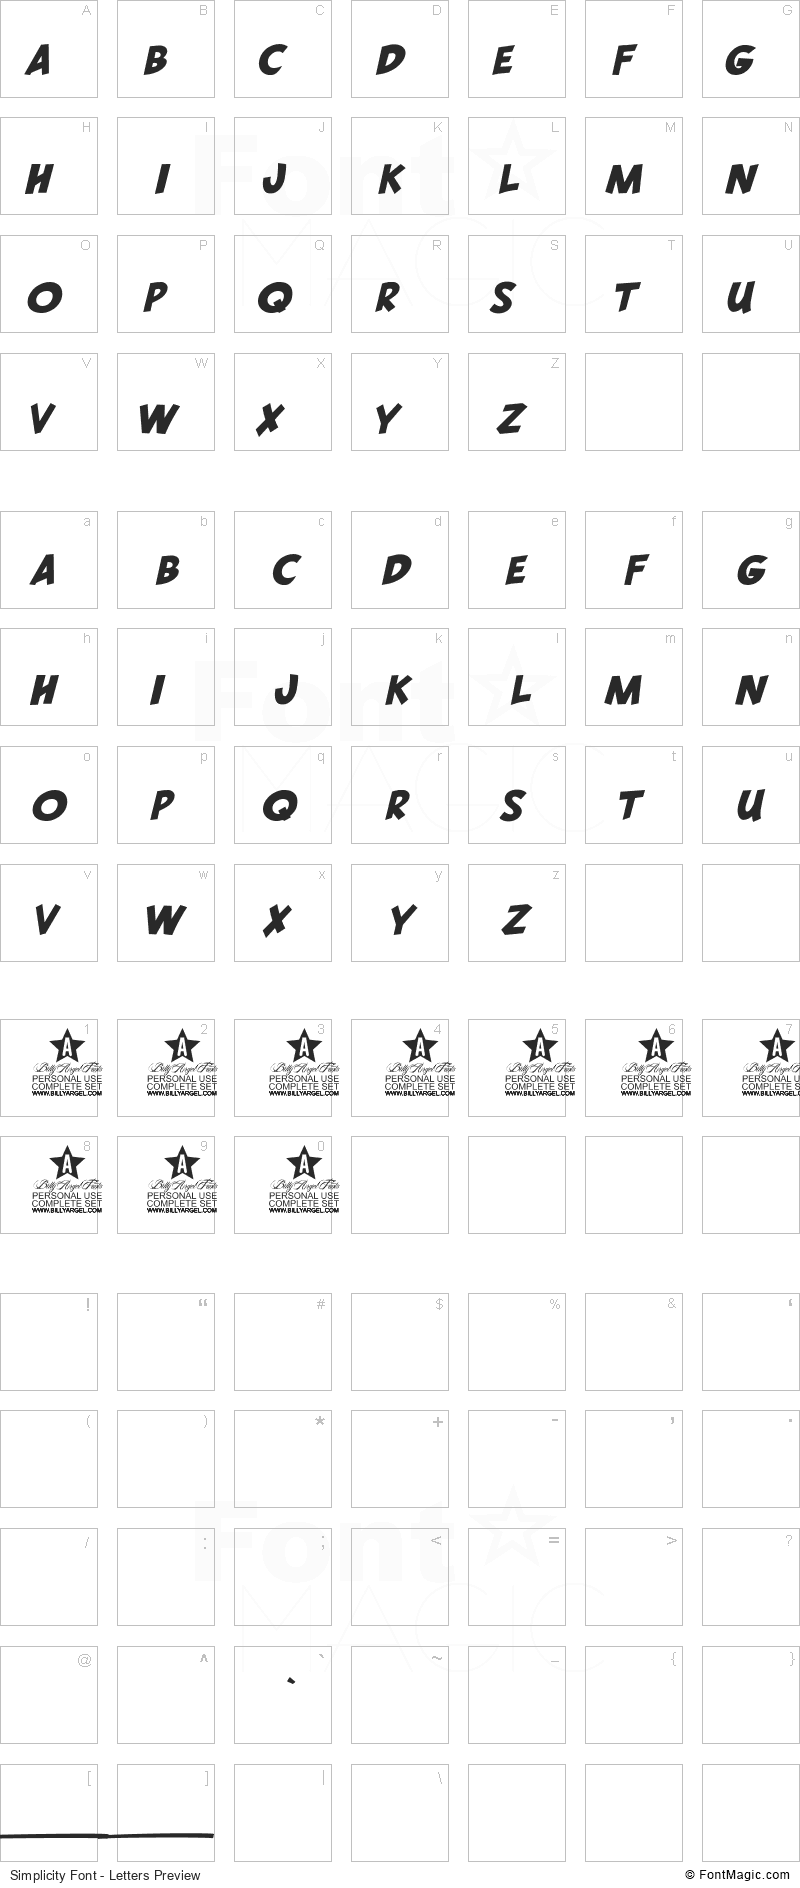 Simplicity Font - All Latters Preview Chart